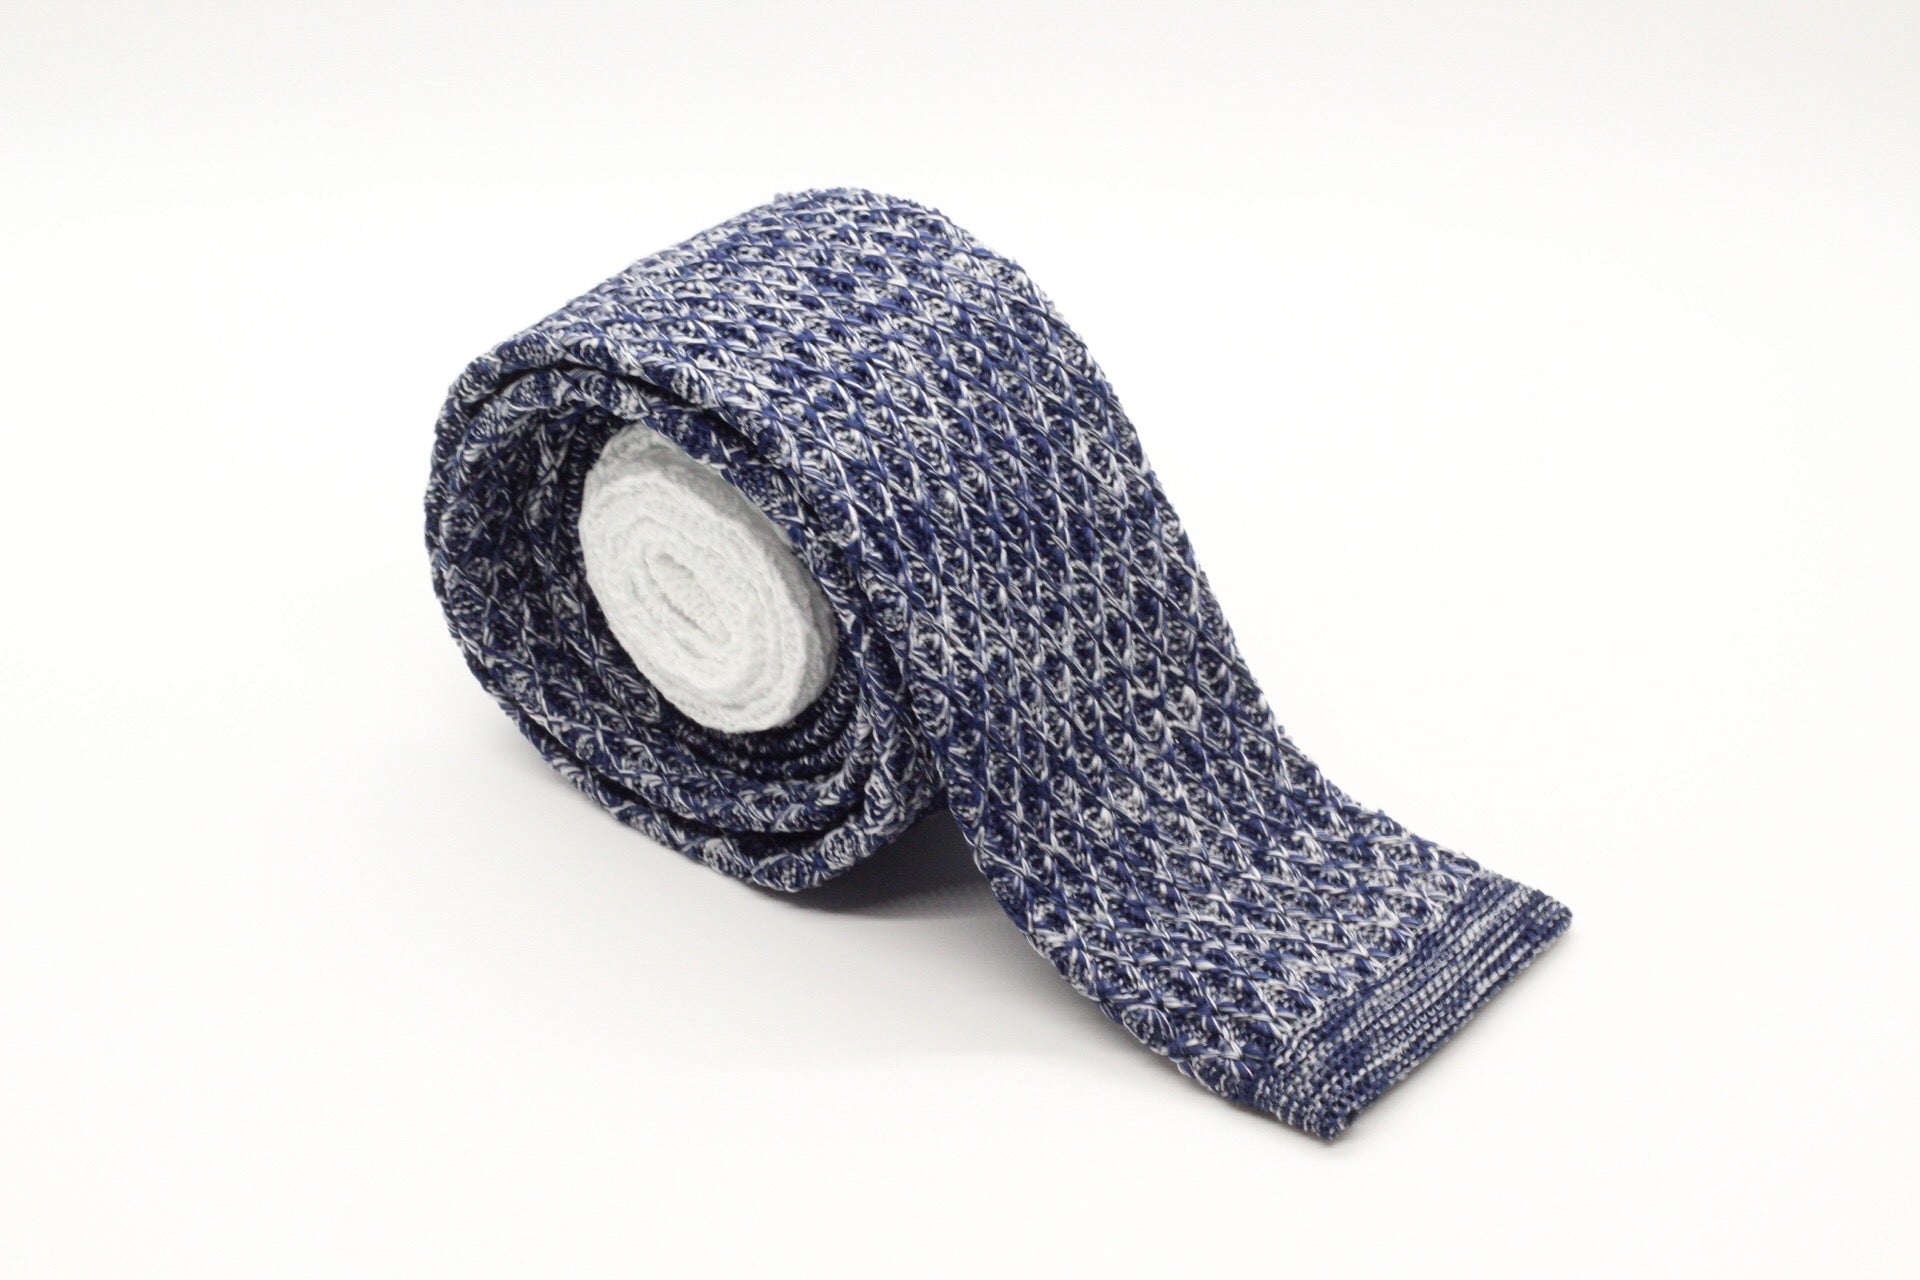 The Knitted Blue Sock Tie